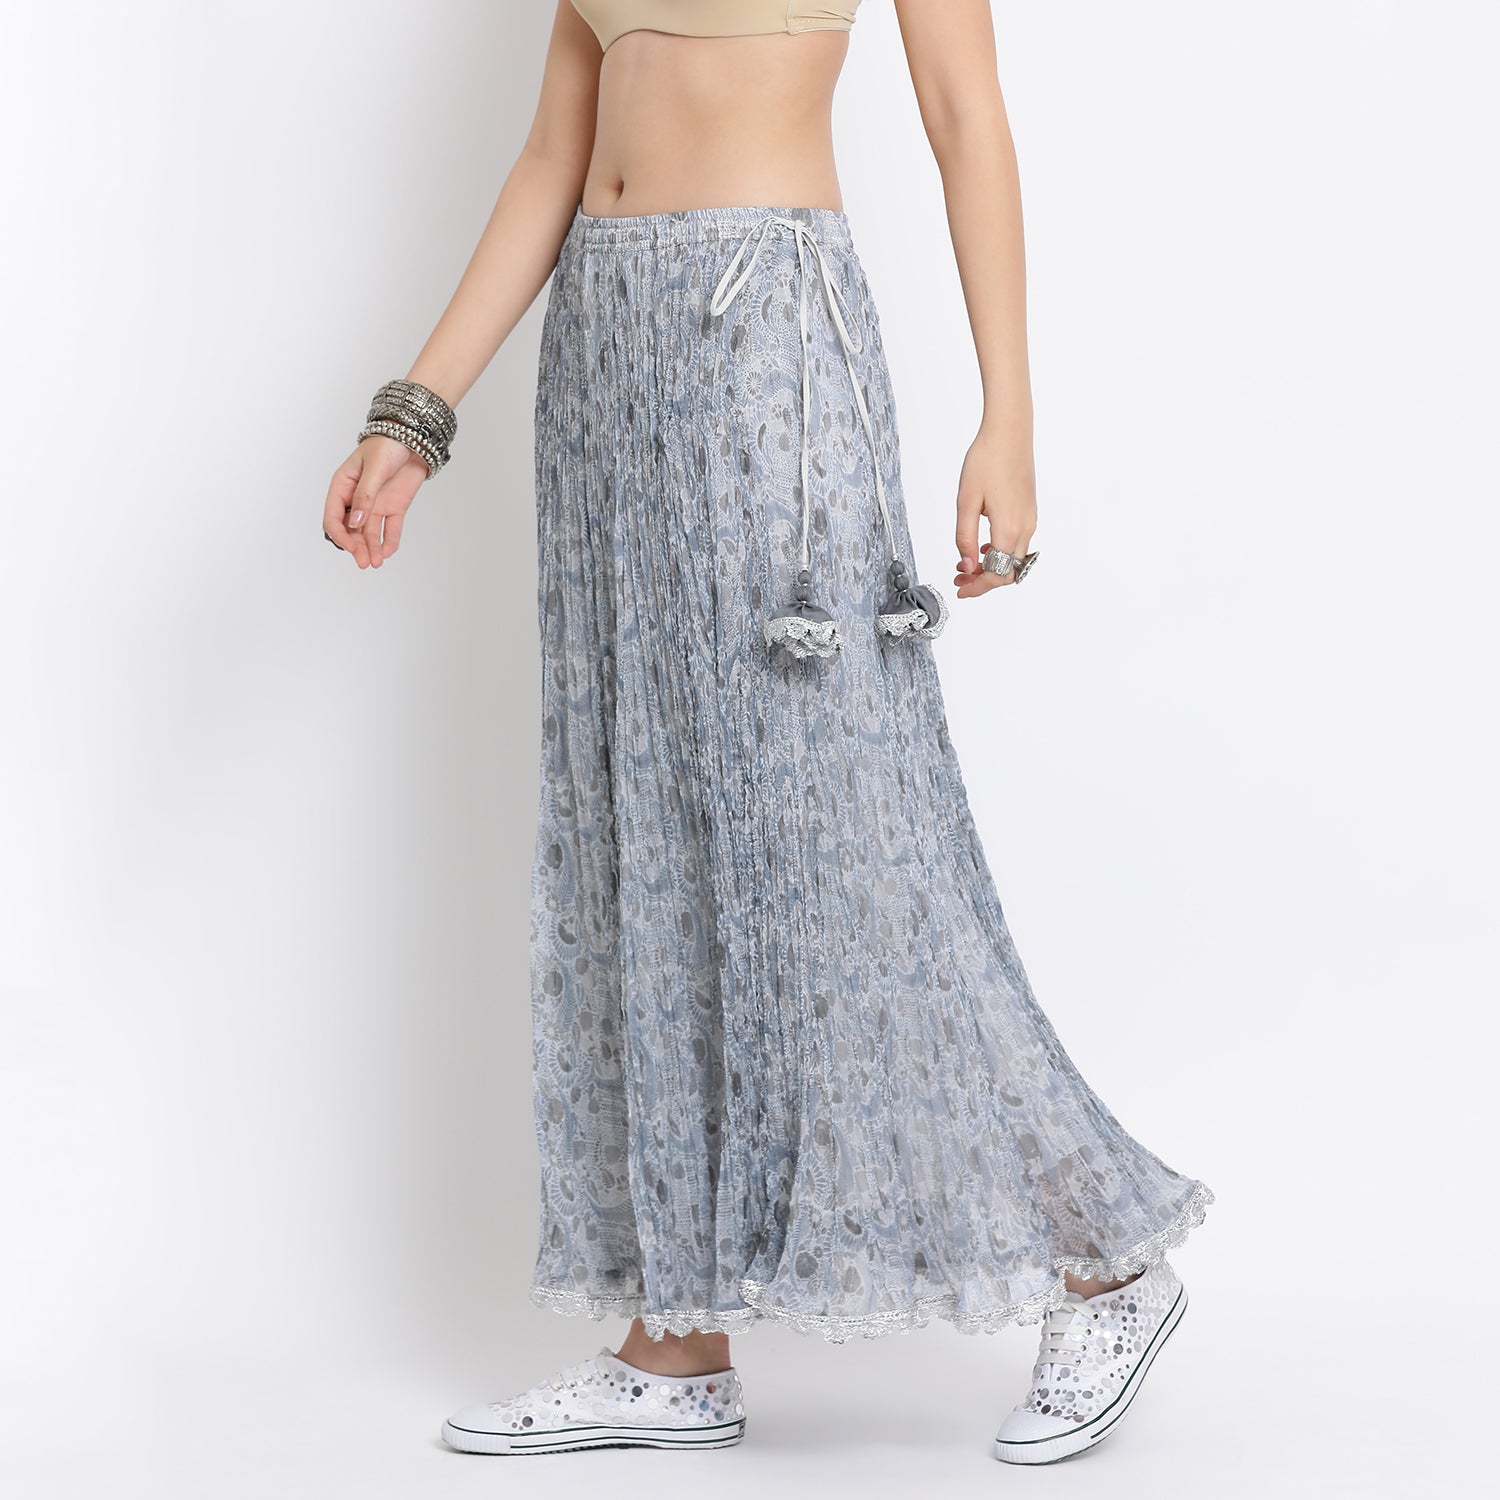 Blue flower printed chiffon crinkle skirt with lace